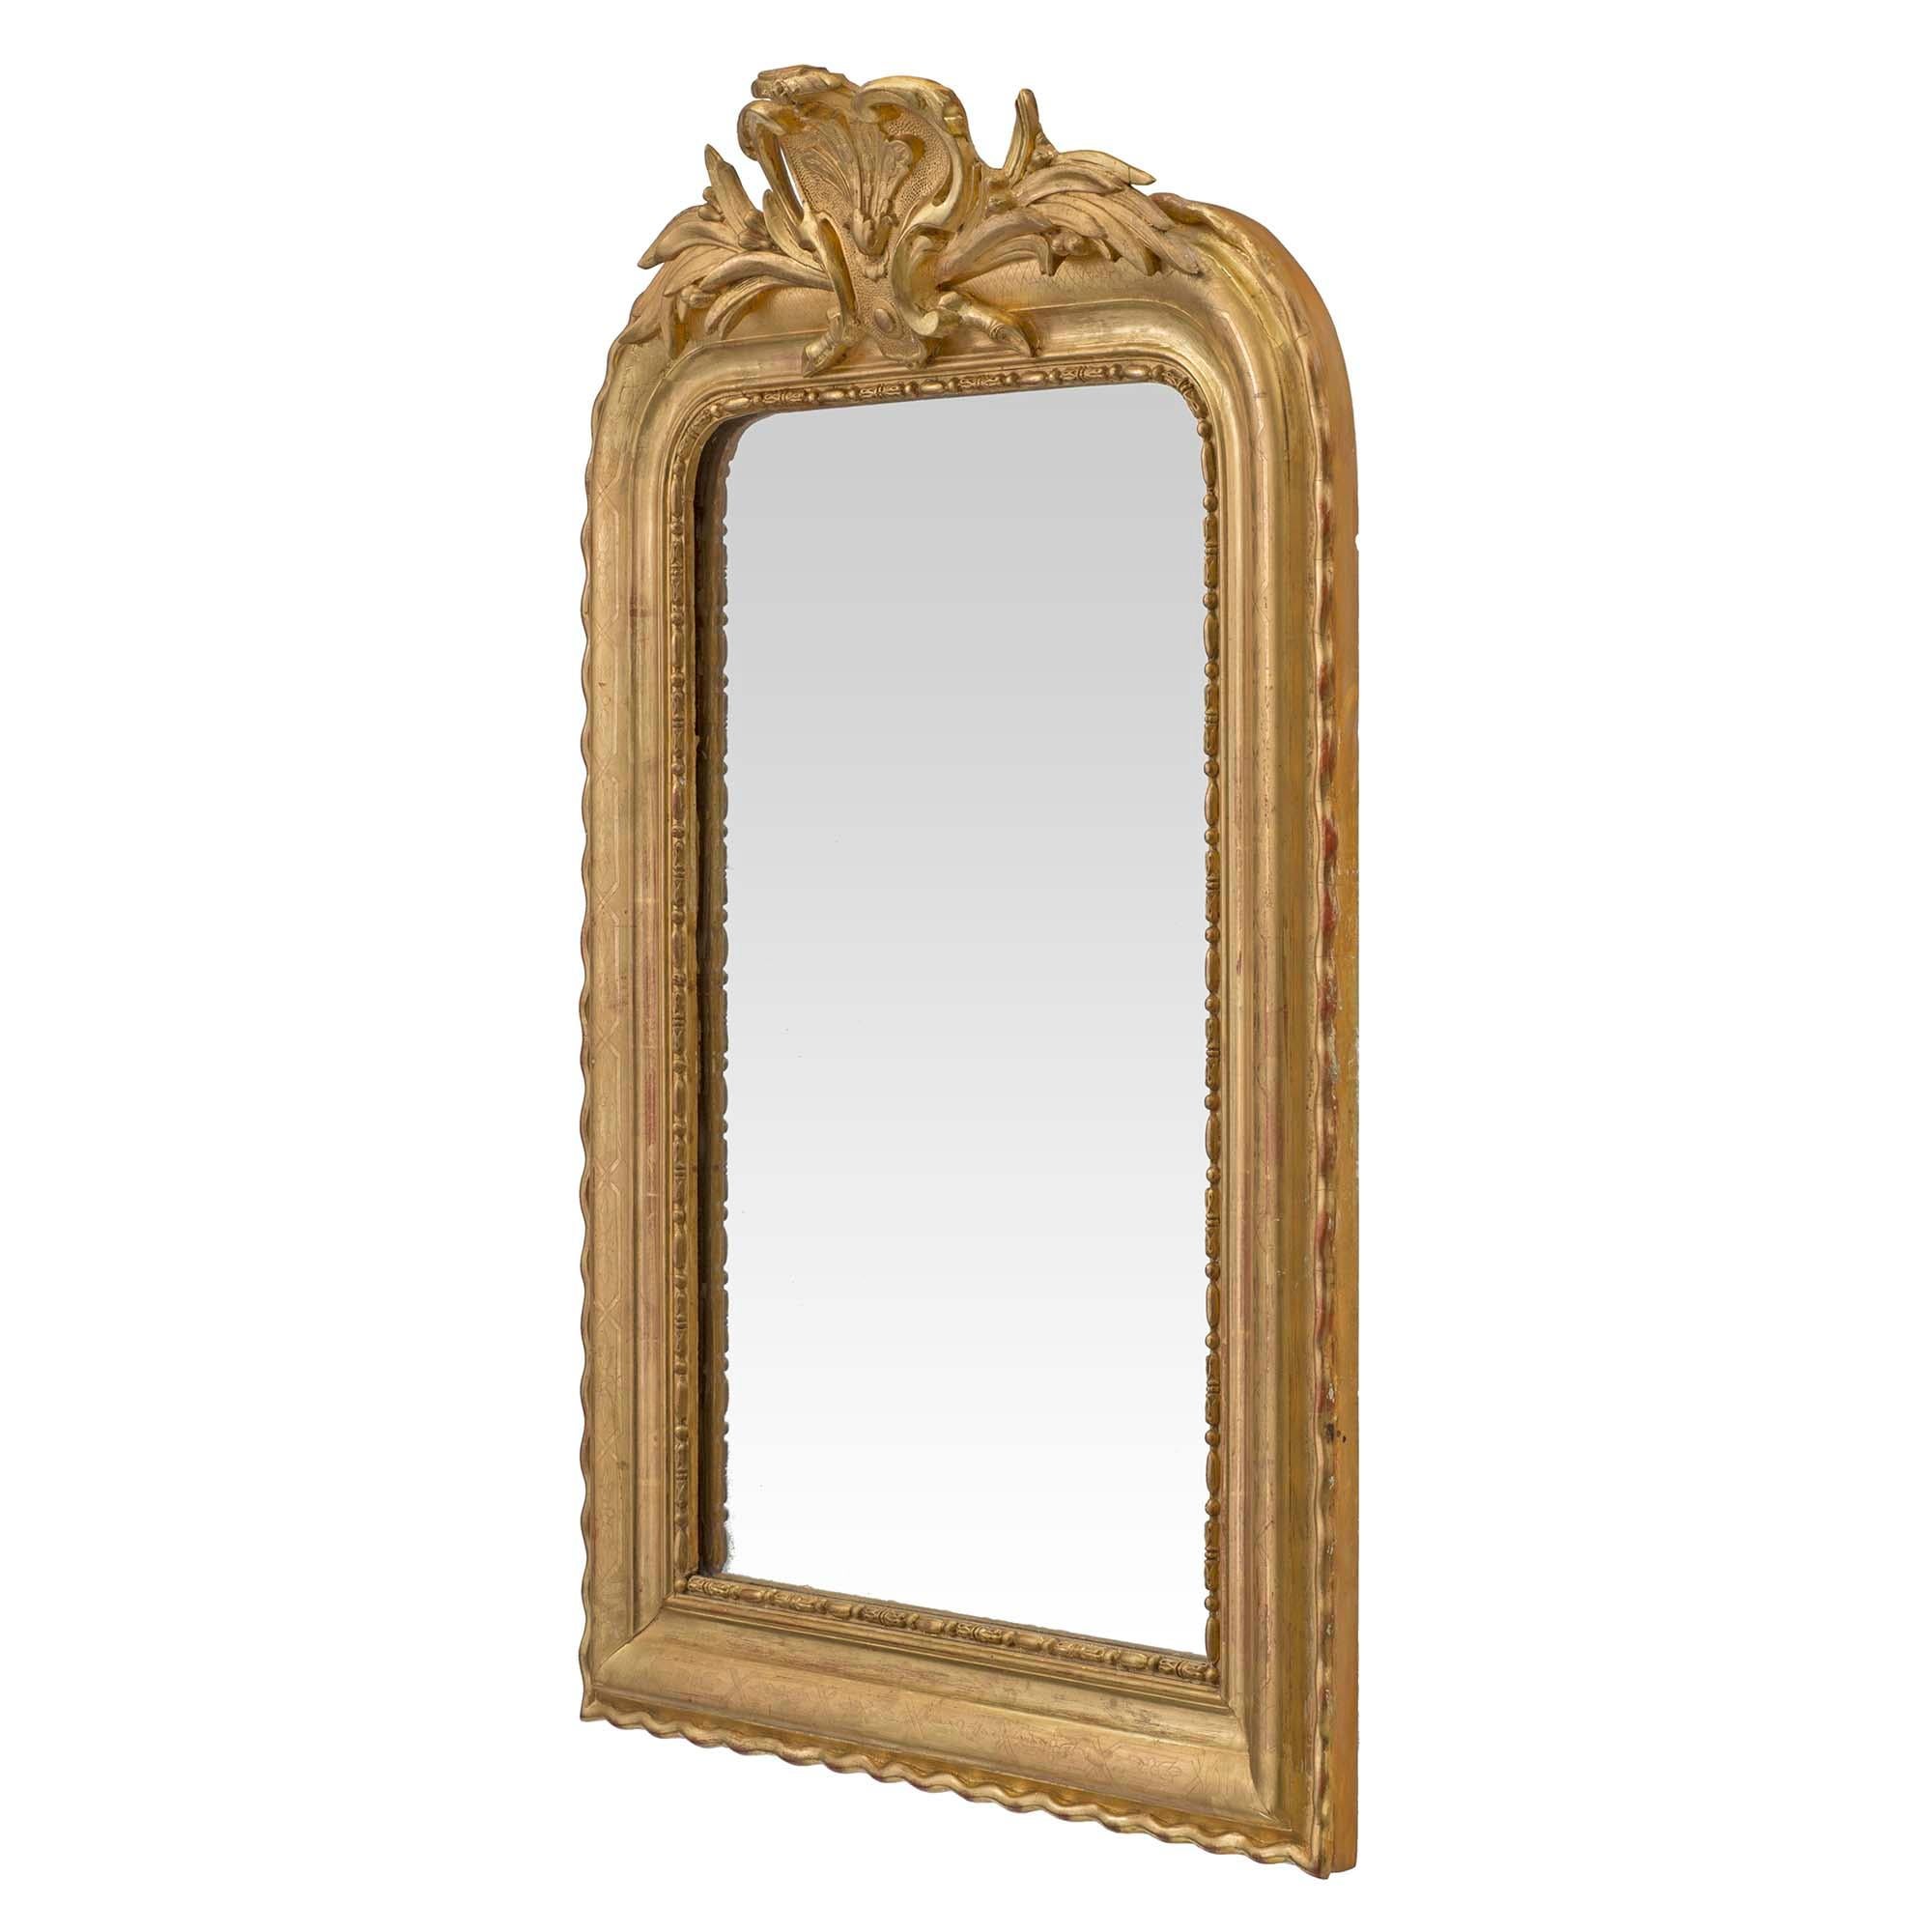 A lovely French 19th Century Louis XVI St. giltwood mirror. The original mirror plate is bordered by an egg and dart designed trim within the moulded mirror with scrolled edges. At the attractive top crown is a central large acanthus leaf amidst